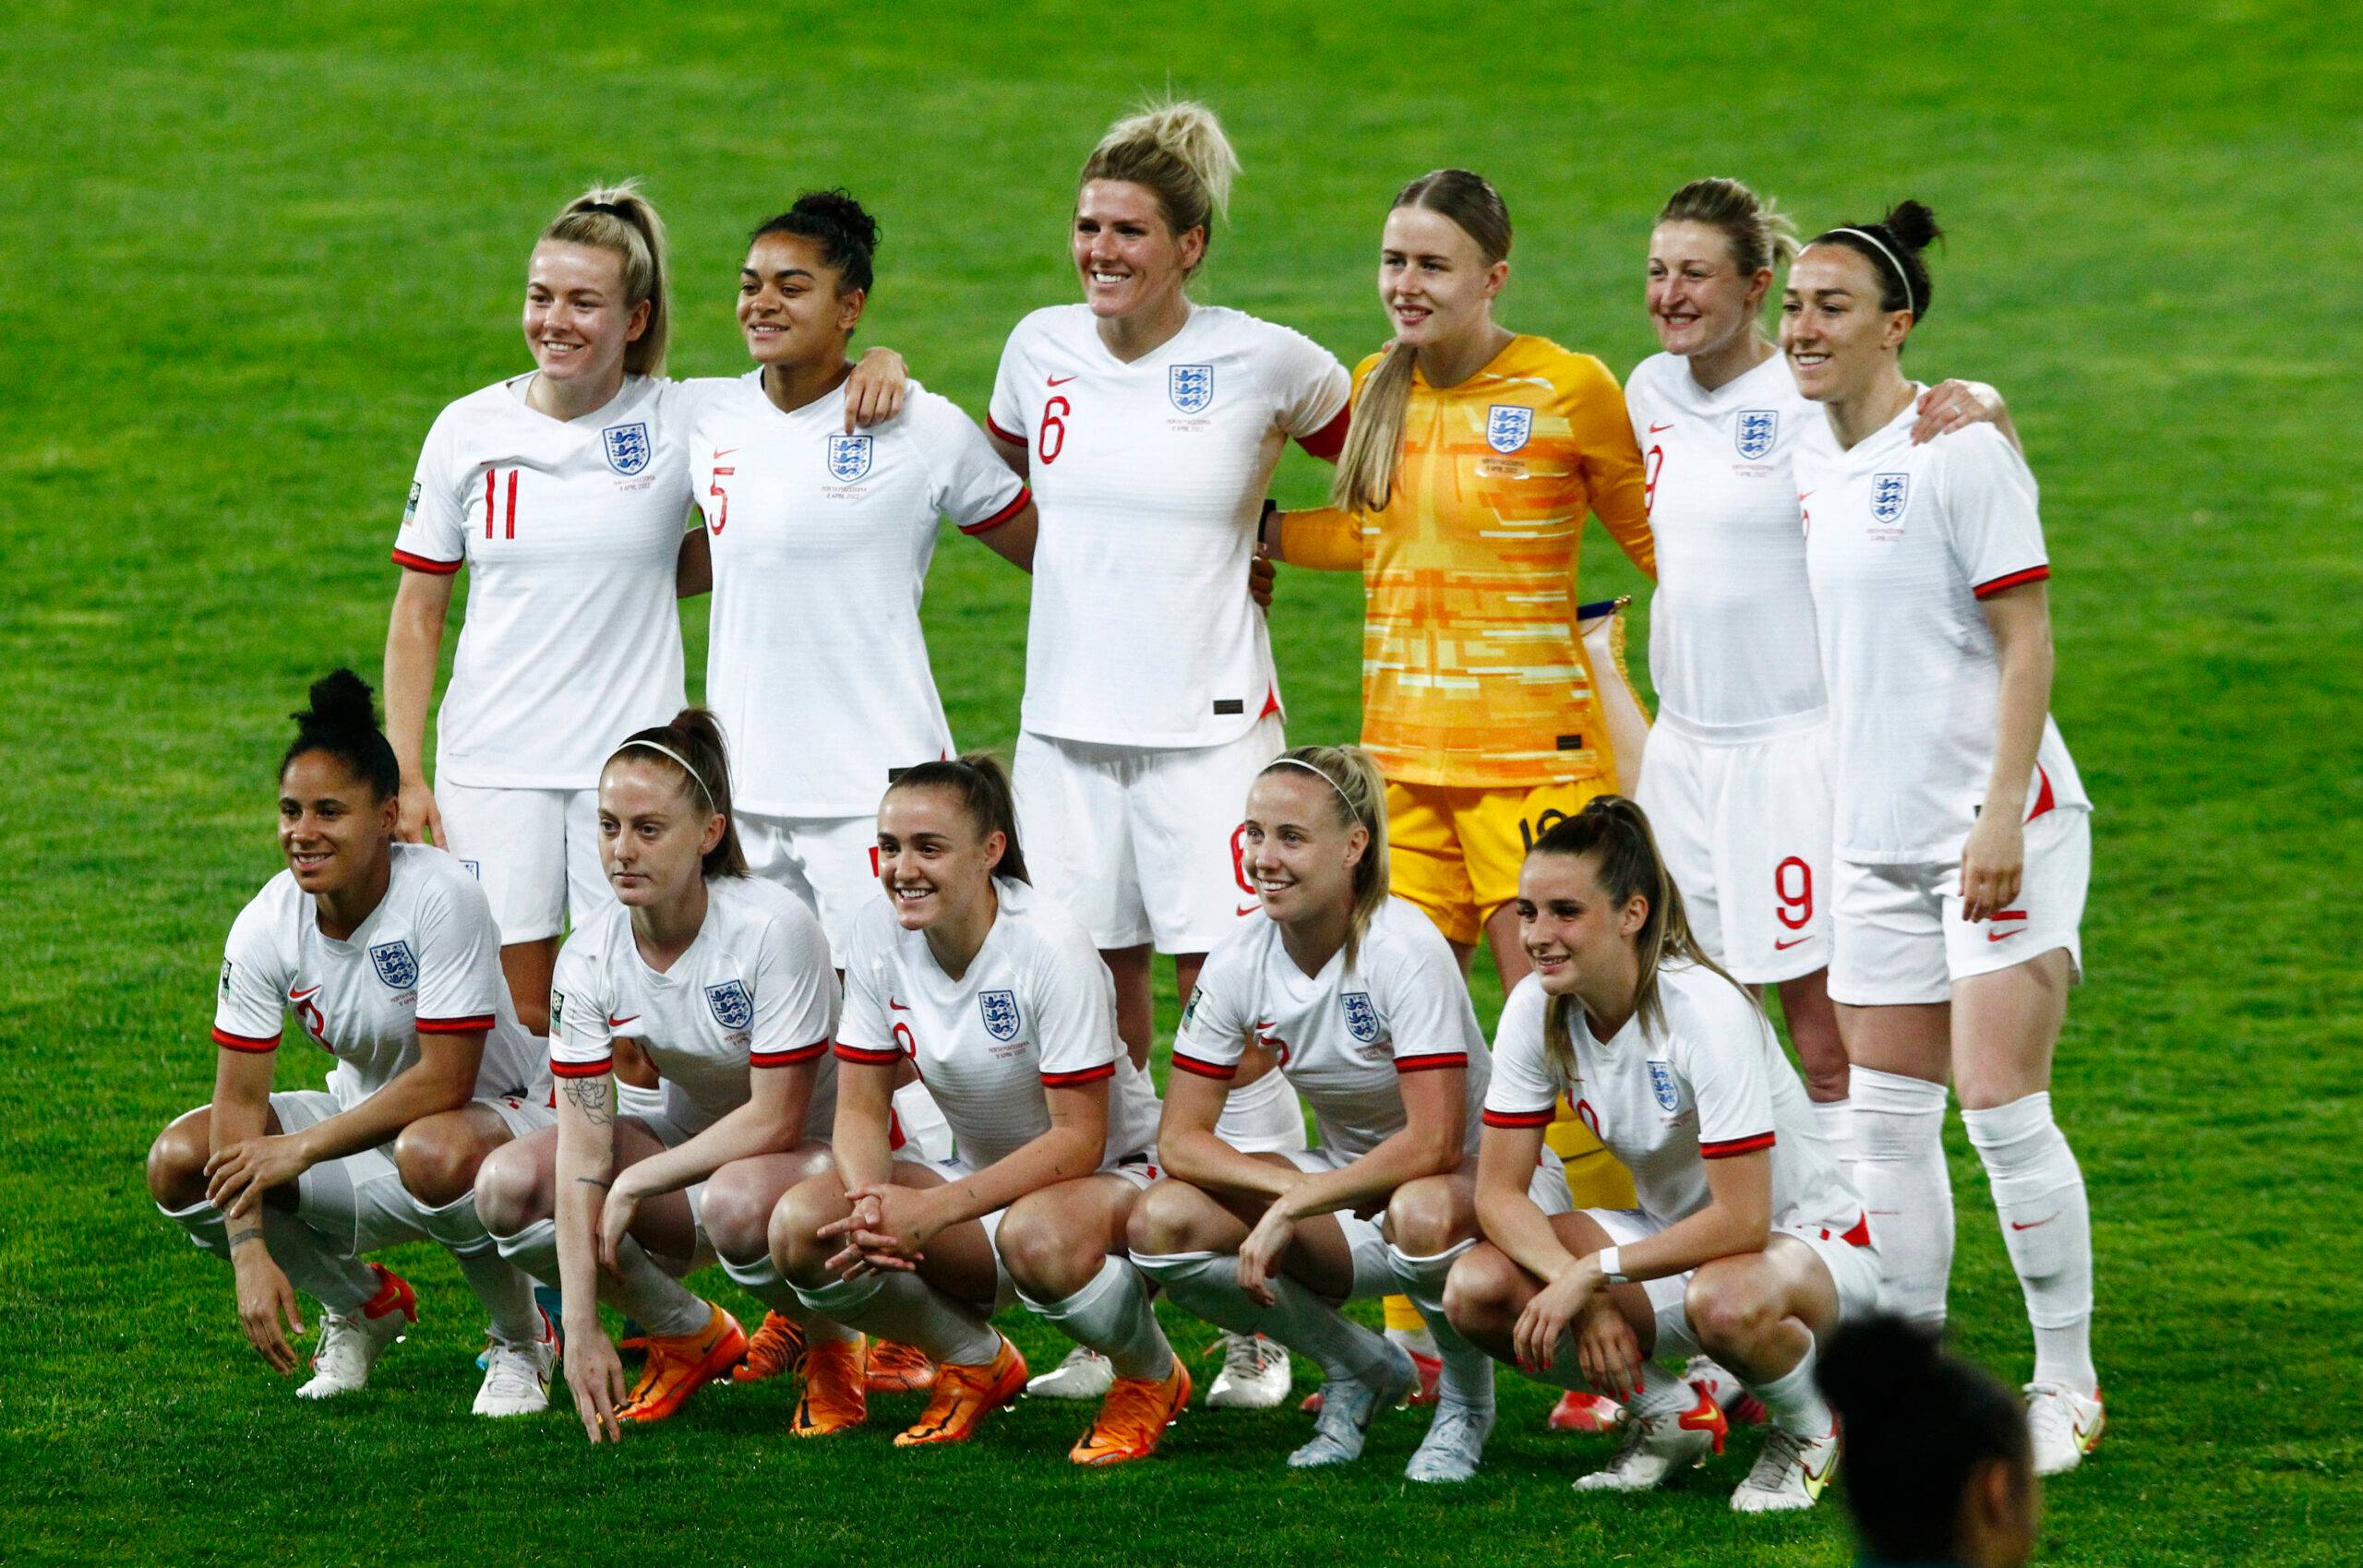 England Women pose for photo ahead of kick-off